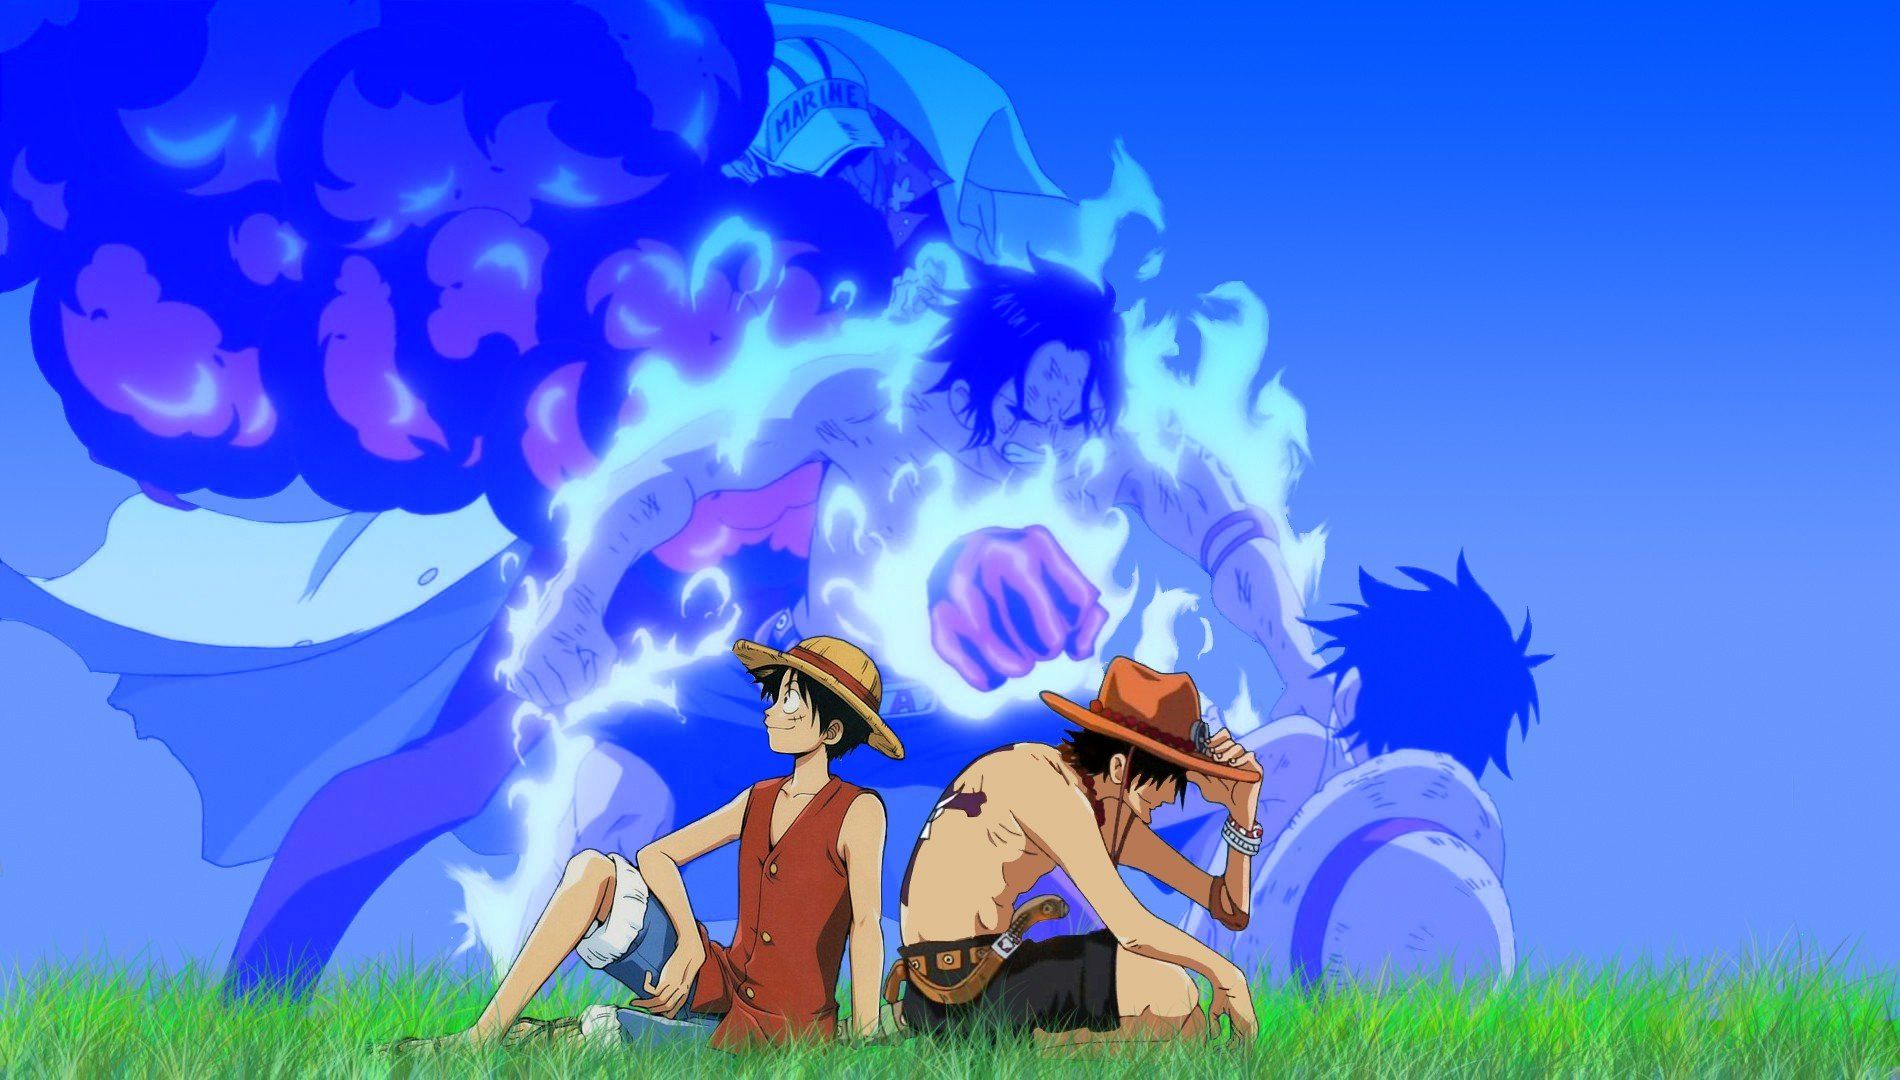 Luffy, Sabo, and Ace phone wallpaper by TheOGScottas on DeviantArt